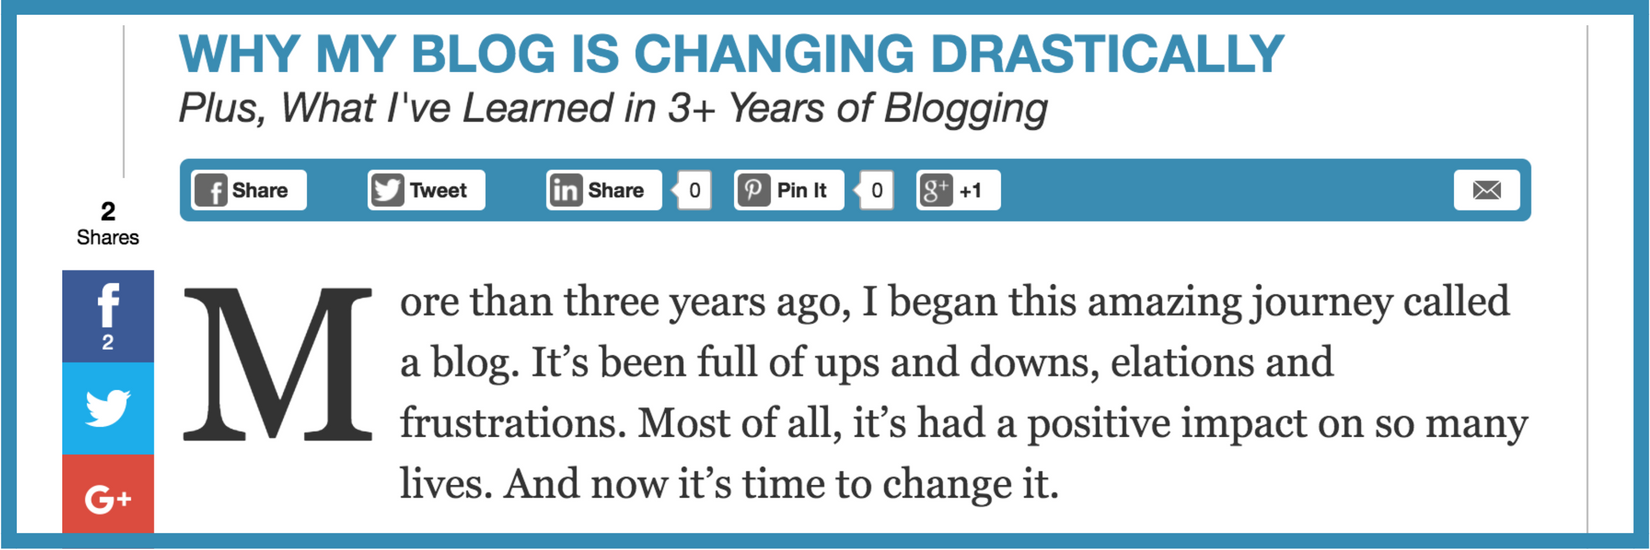 why my blog is changing post